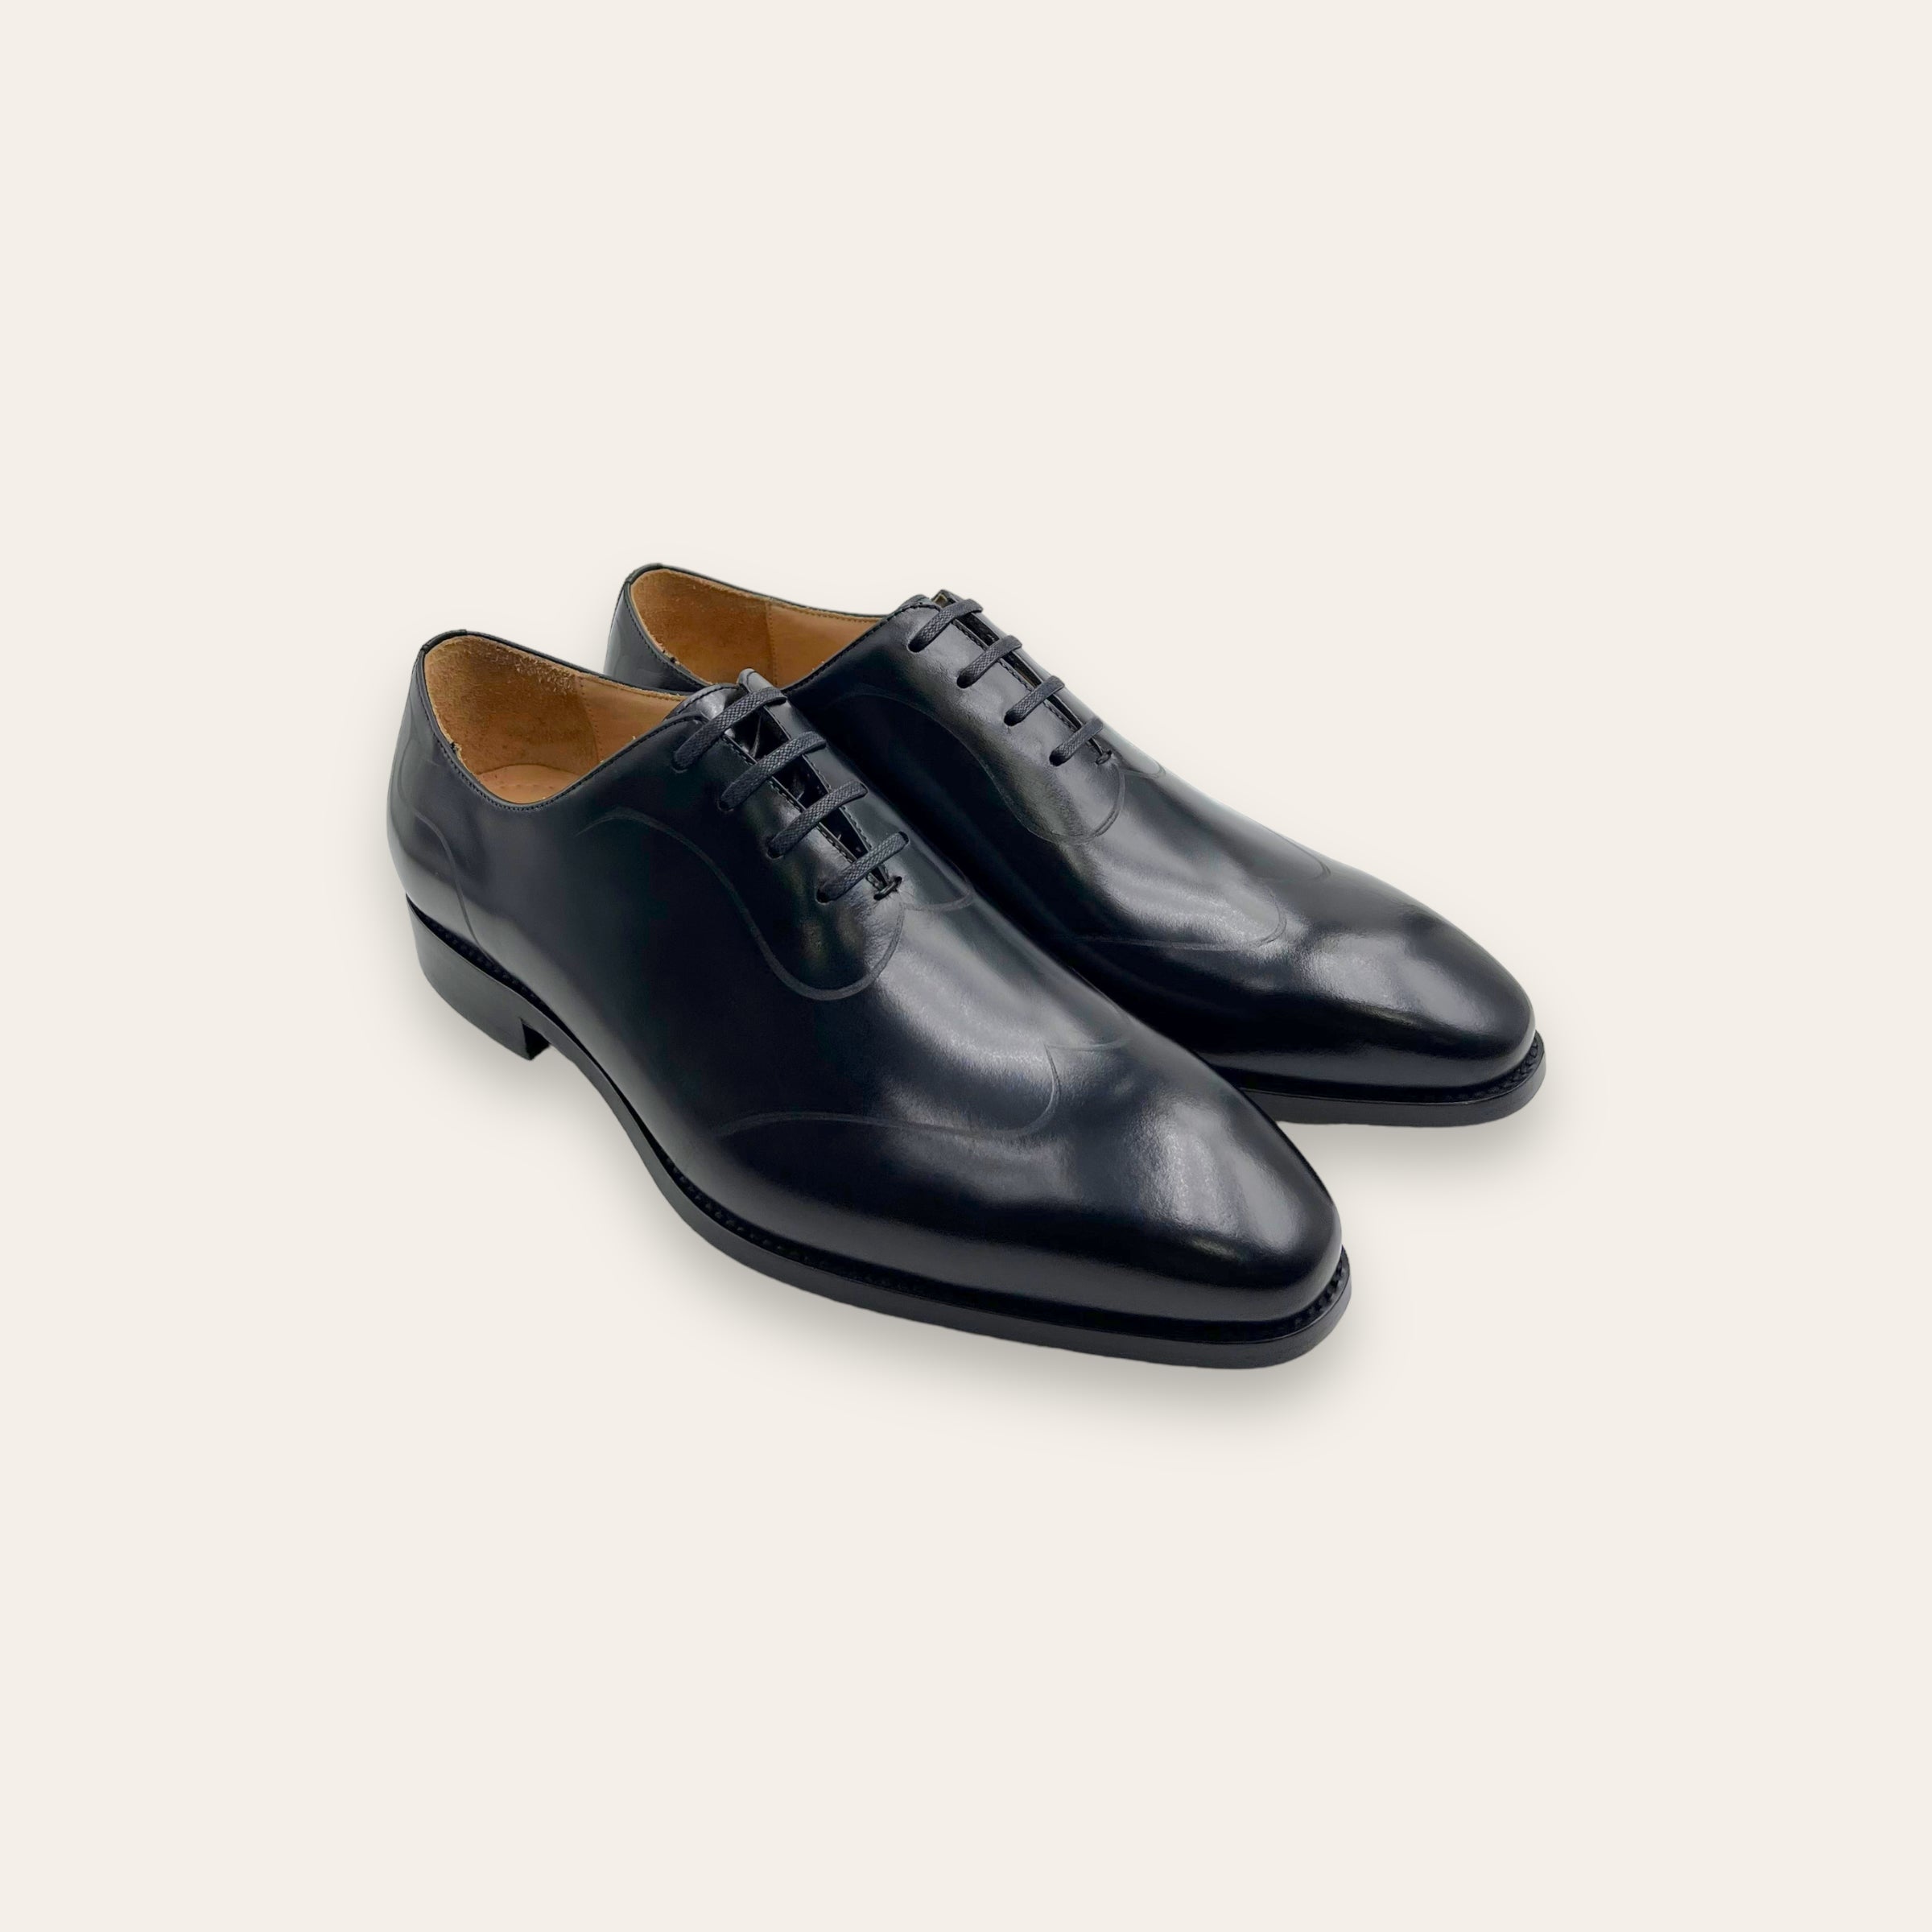 Minimal Brogue Oxford with Leather Outsole (Black)